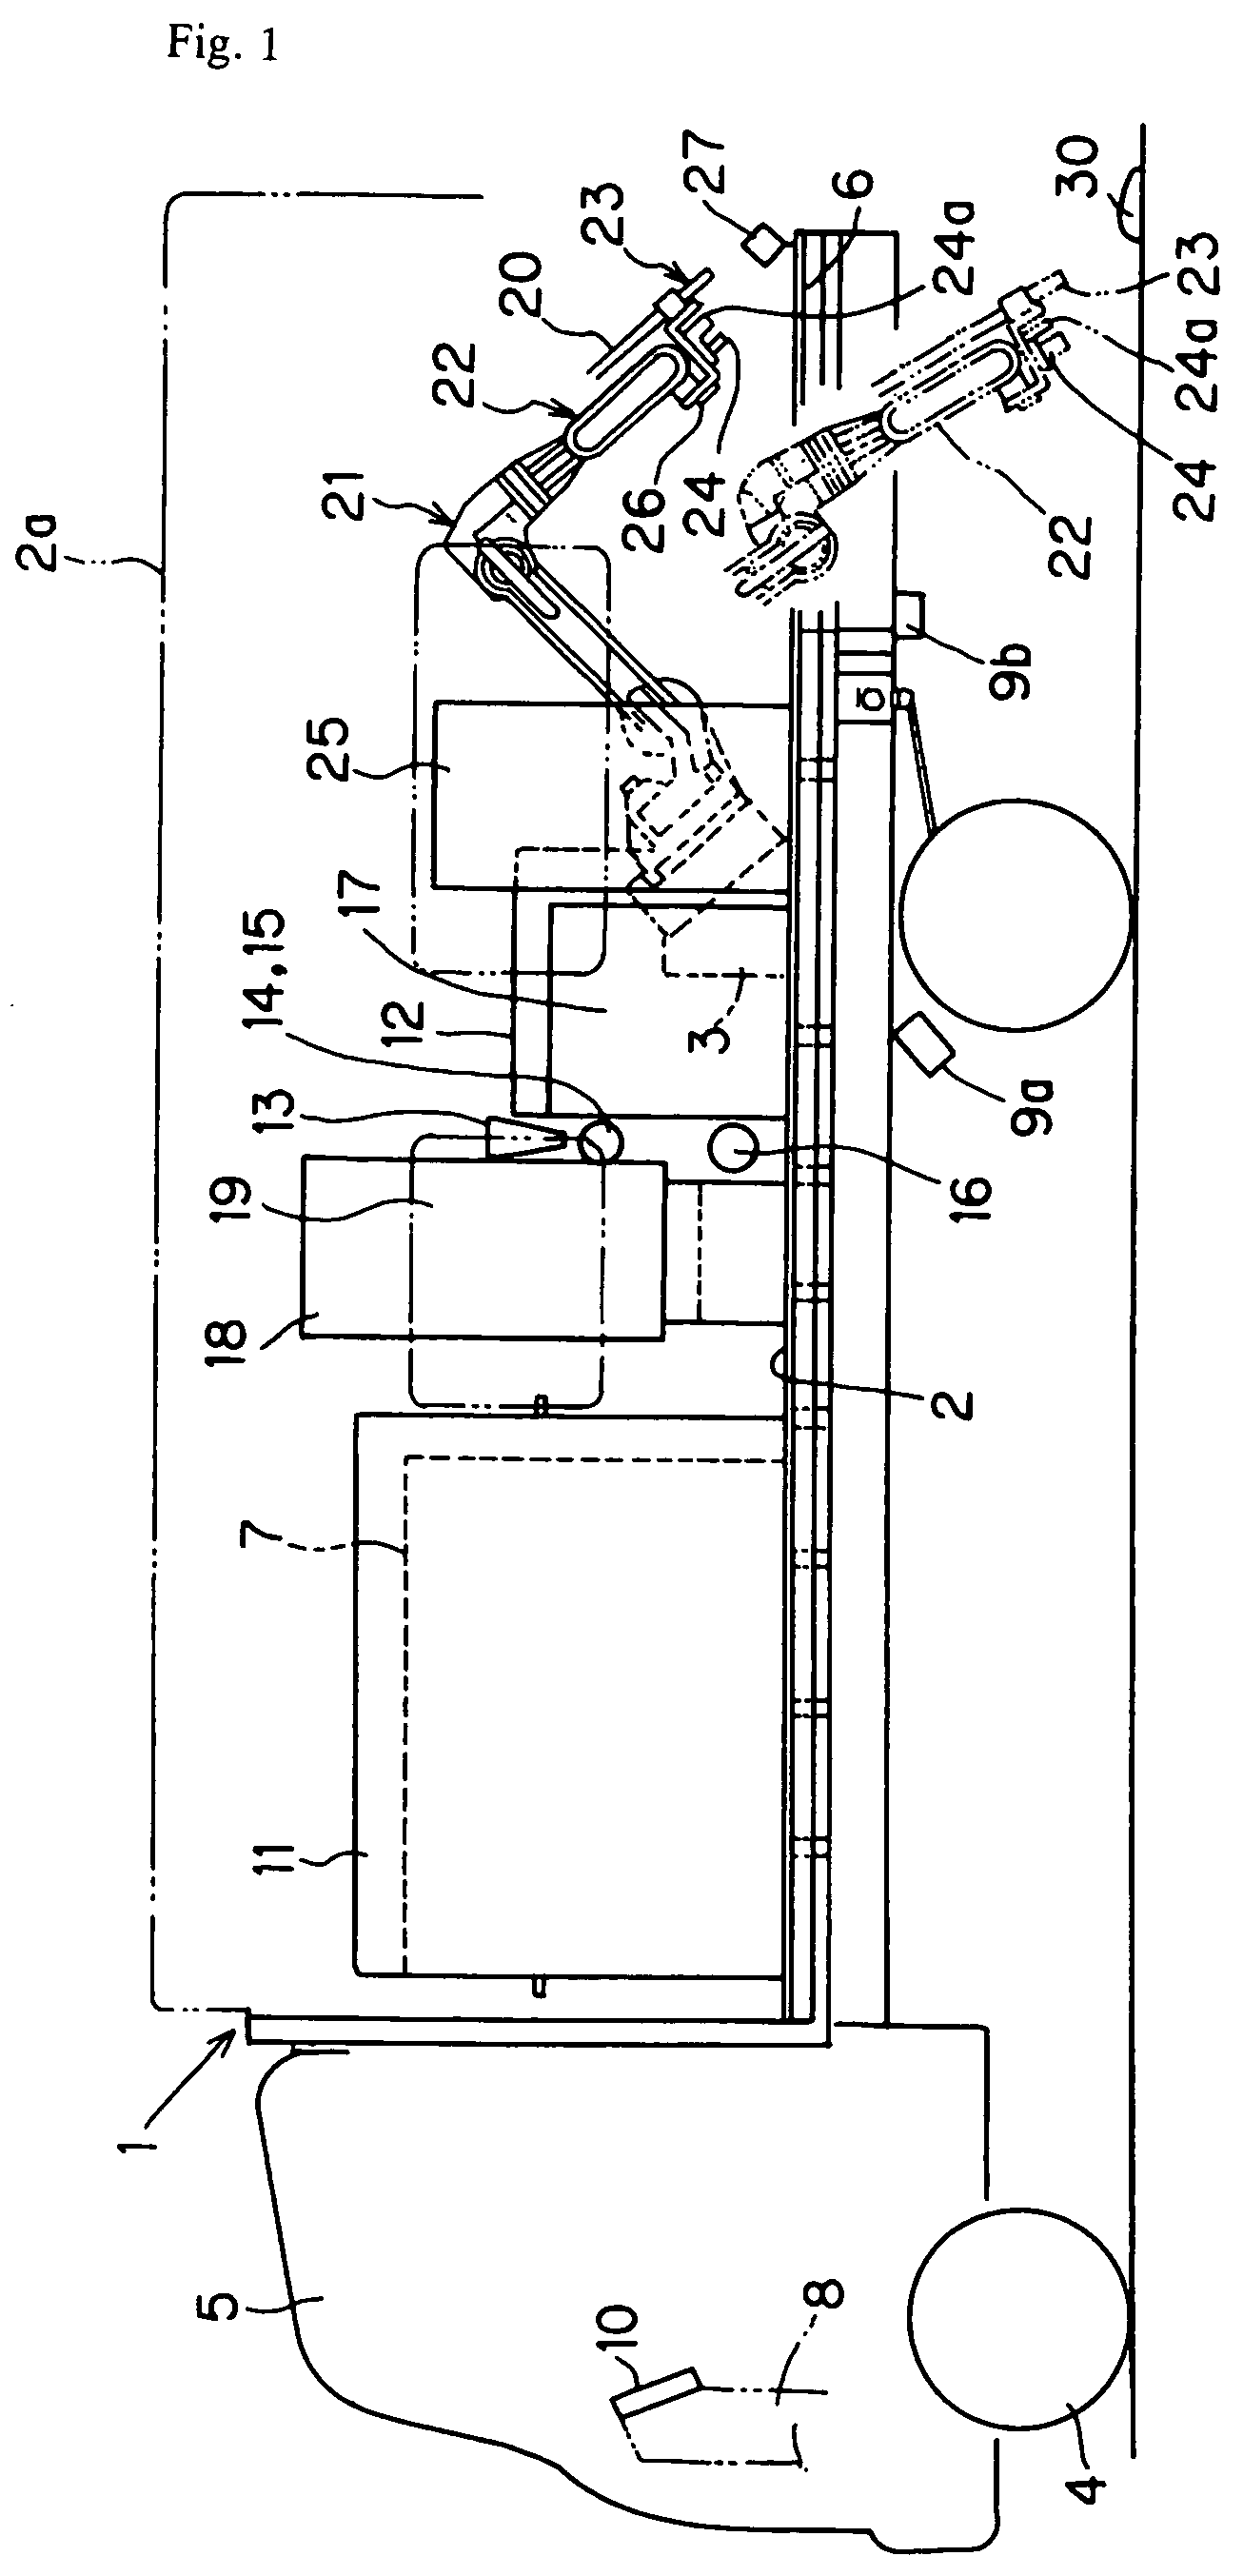 Method and system for cleaning glass surface of pavement light or reflector